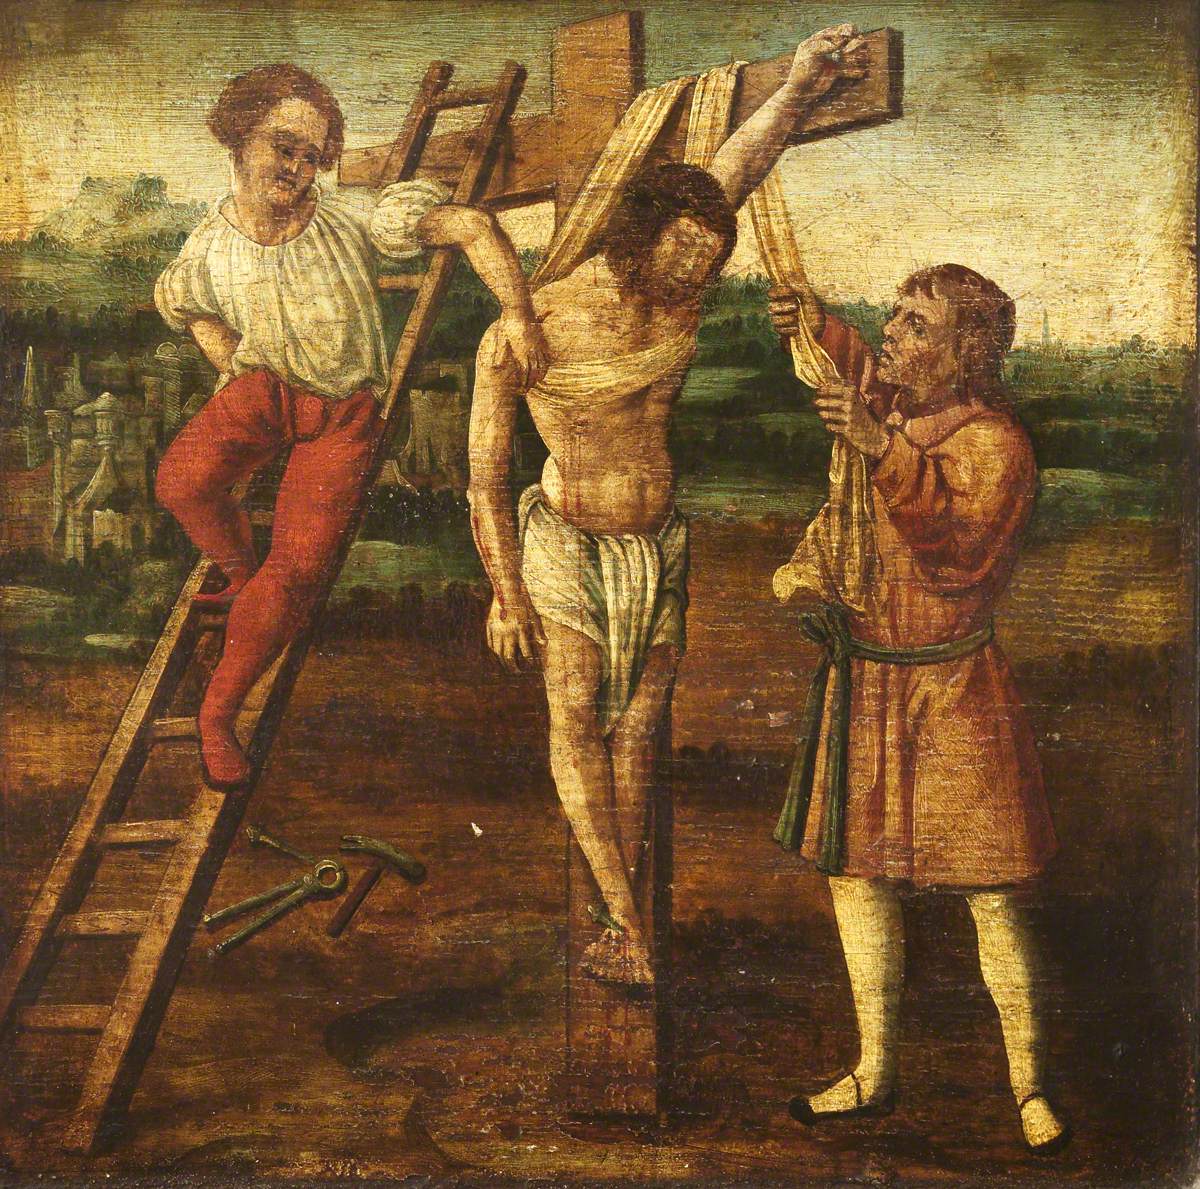 Scenes from the Life of Christ: Descent from the Cross